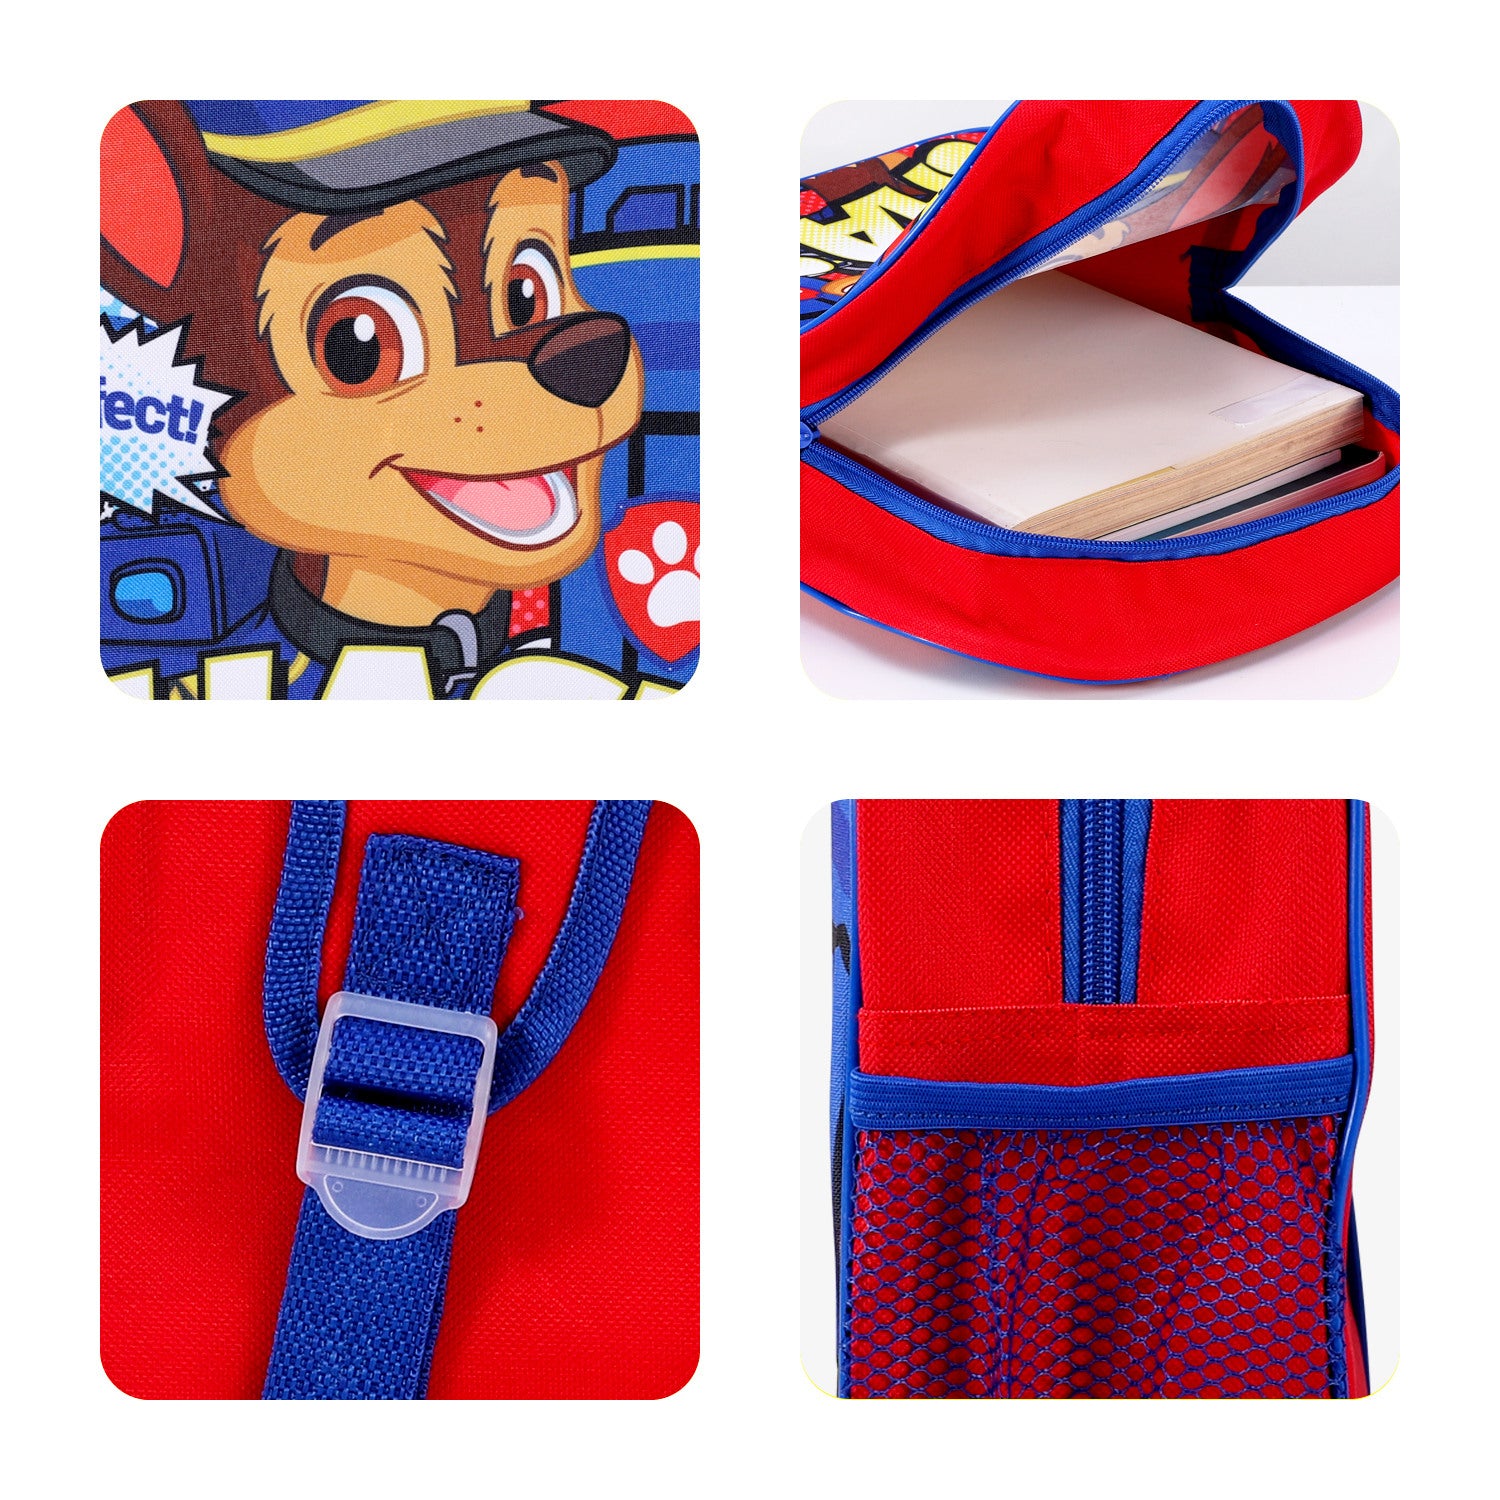 Paw Patrol 'Chase' PAWfect Canvas Backpack